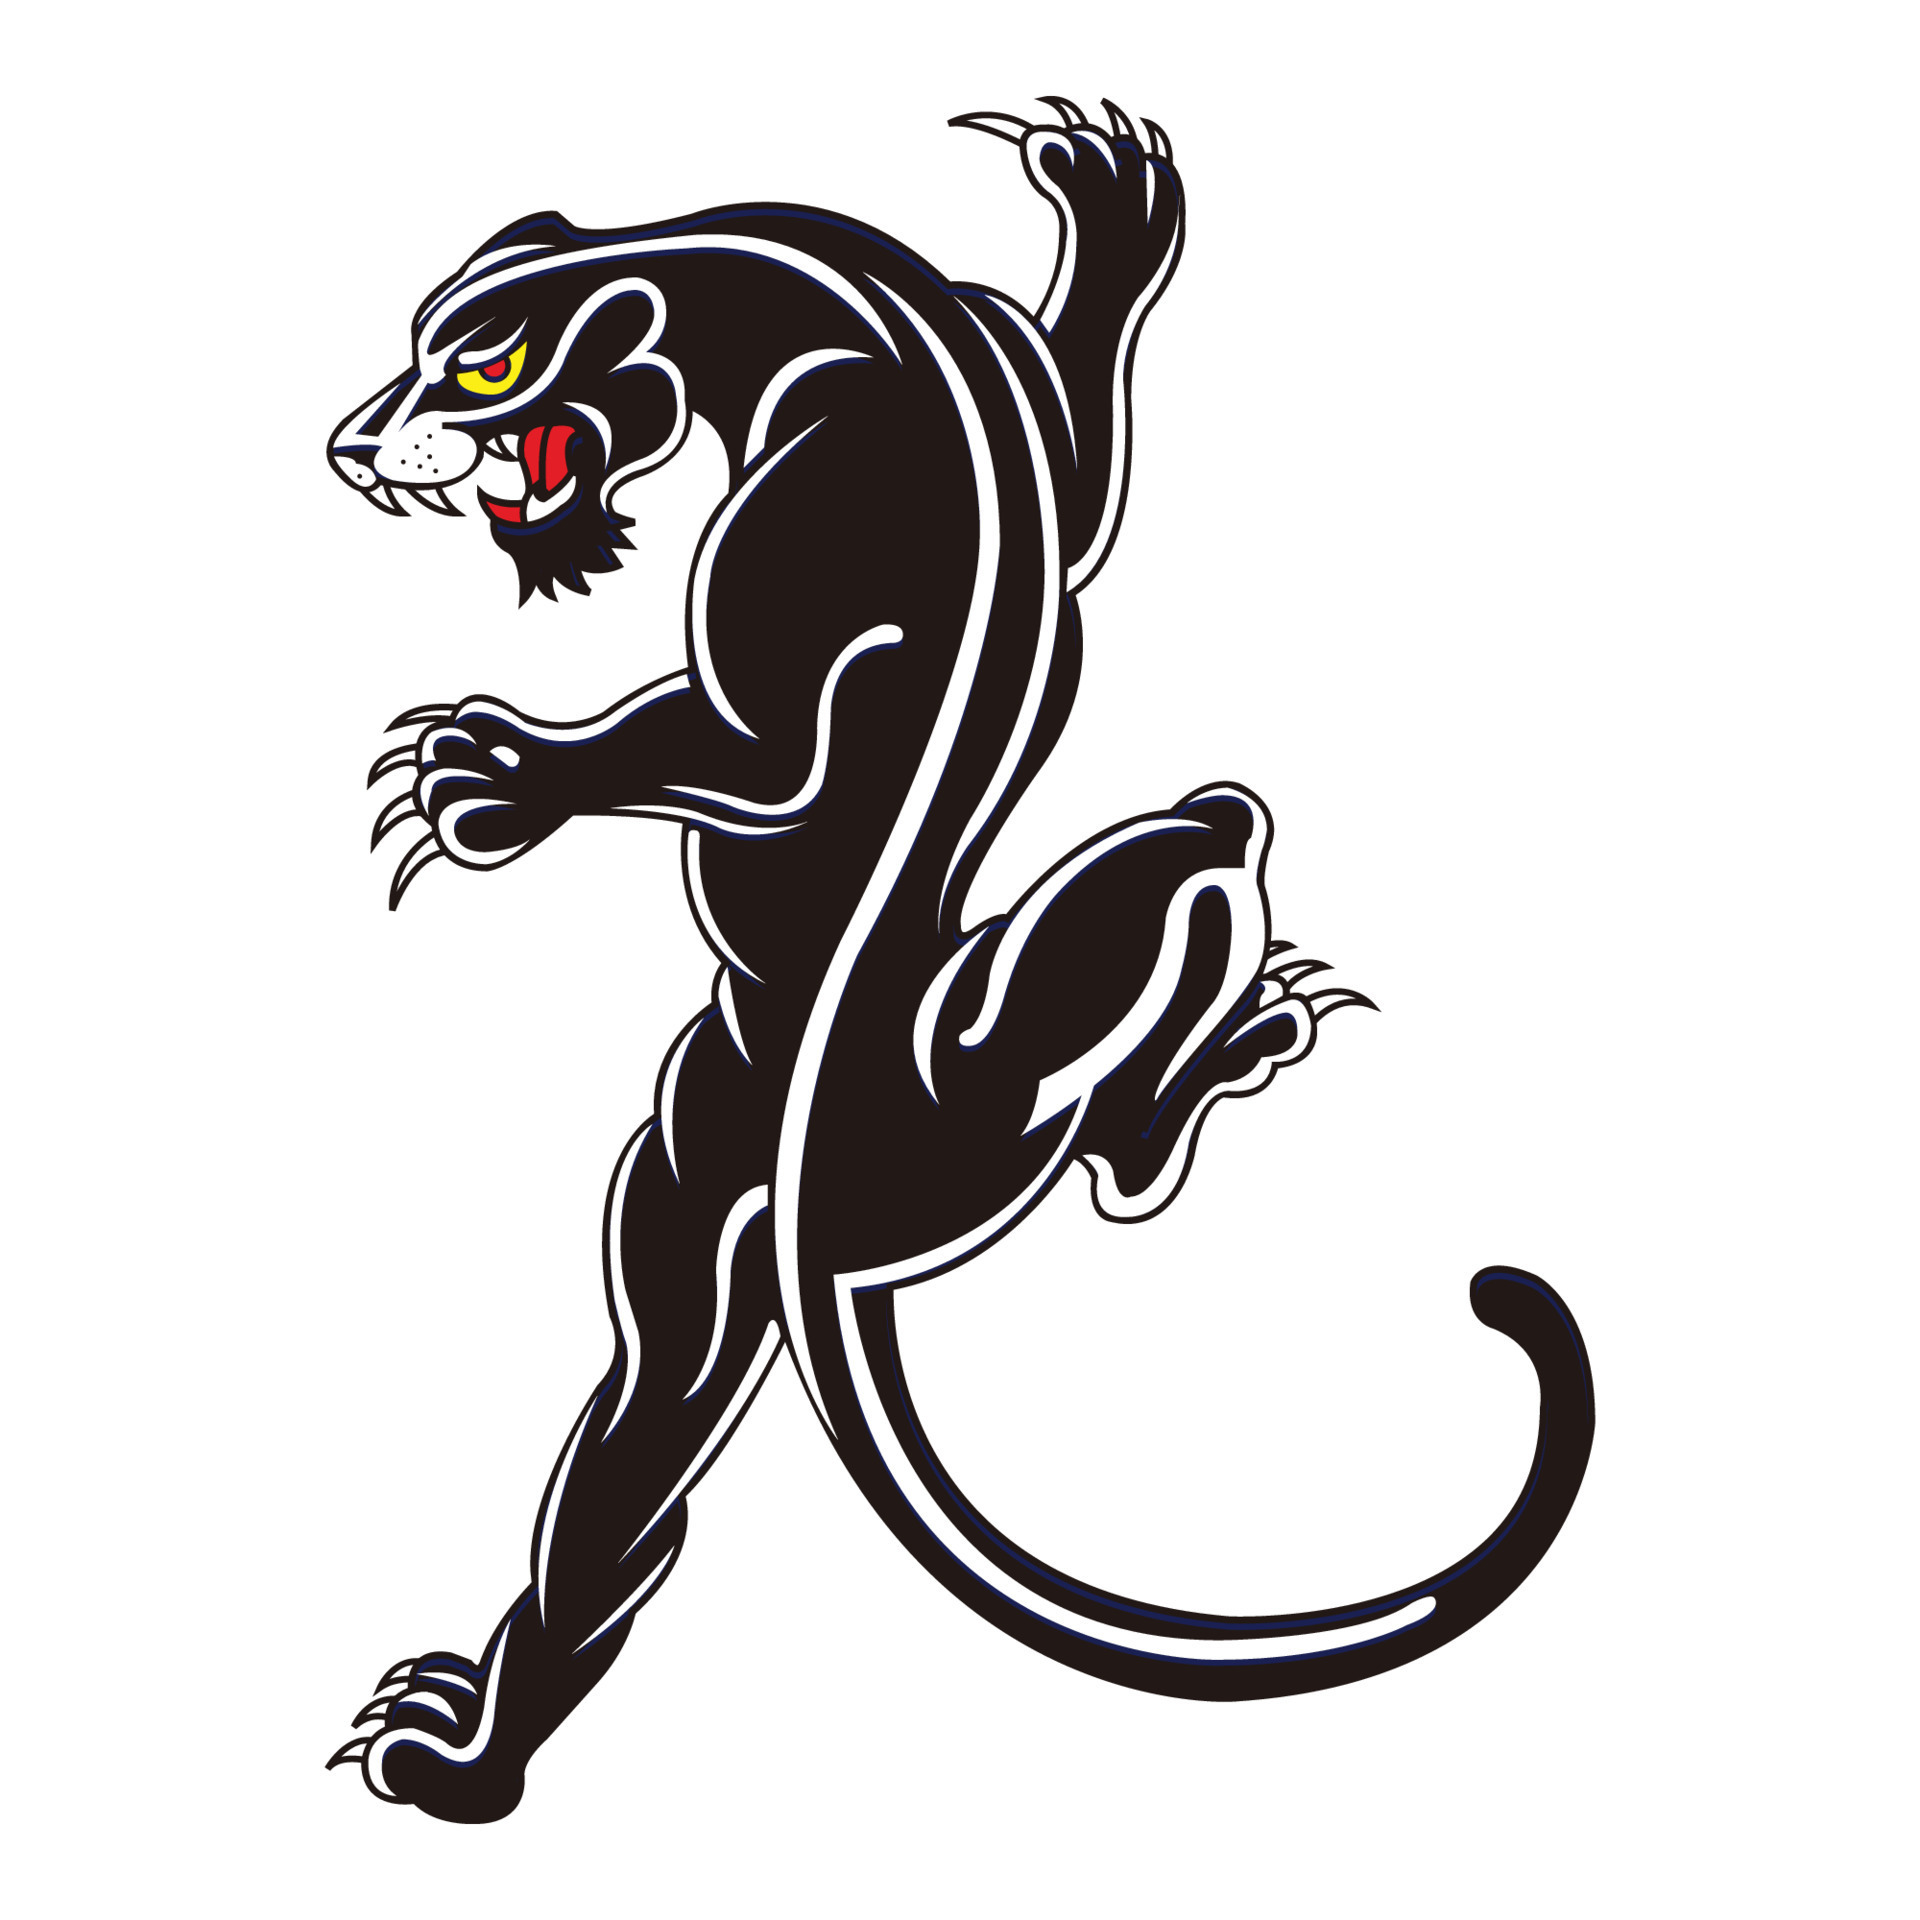 3838 Traditional Panther Images Stock Photos  Vectors  Shutterstock